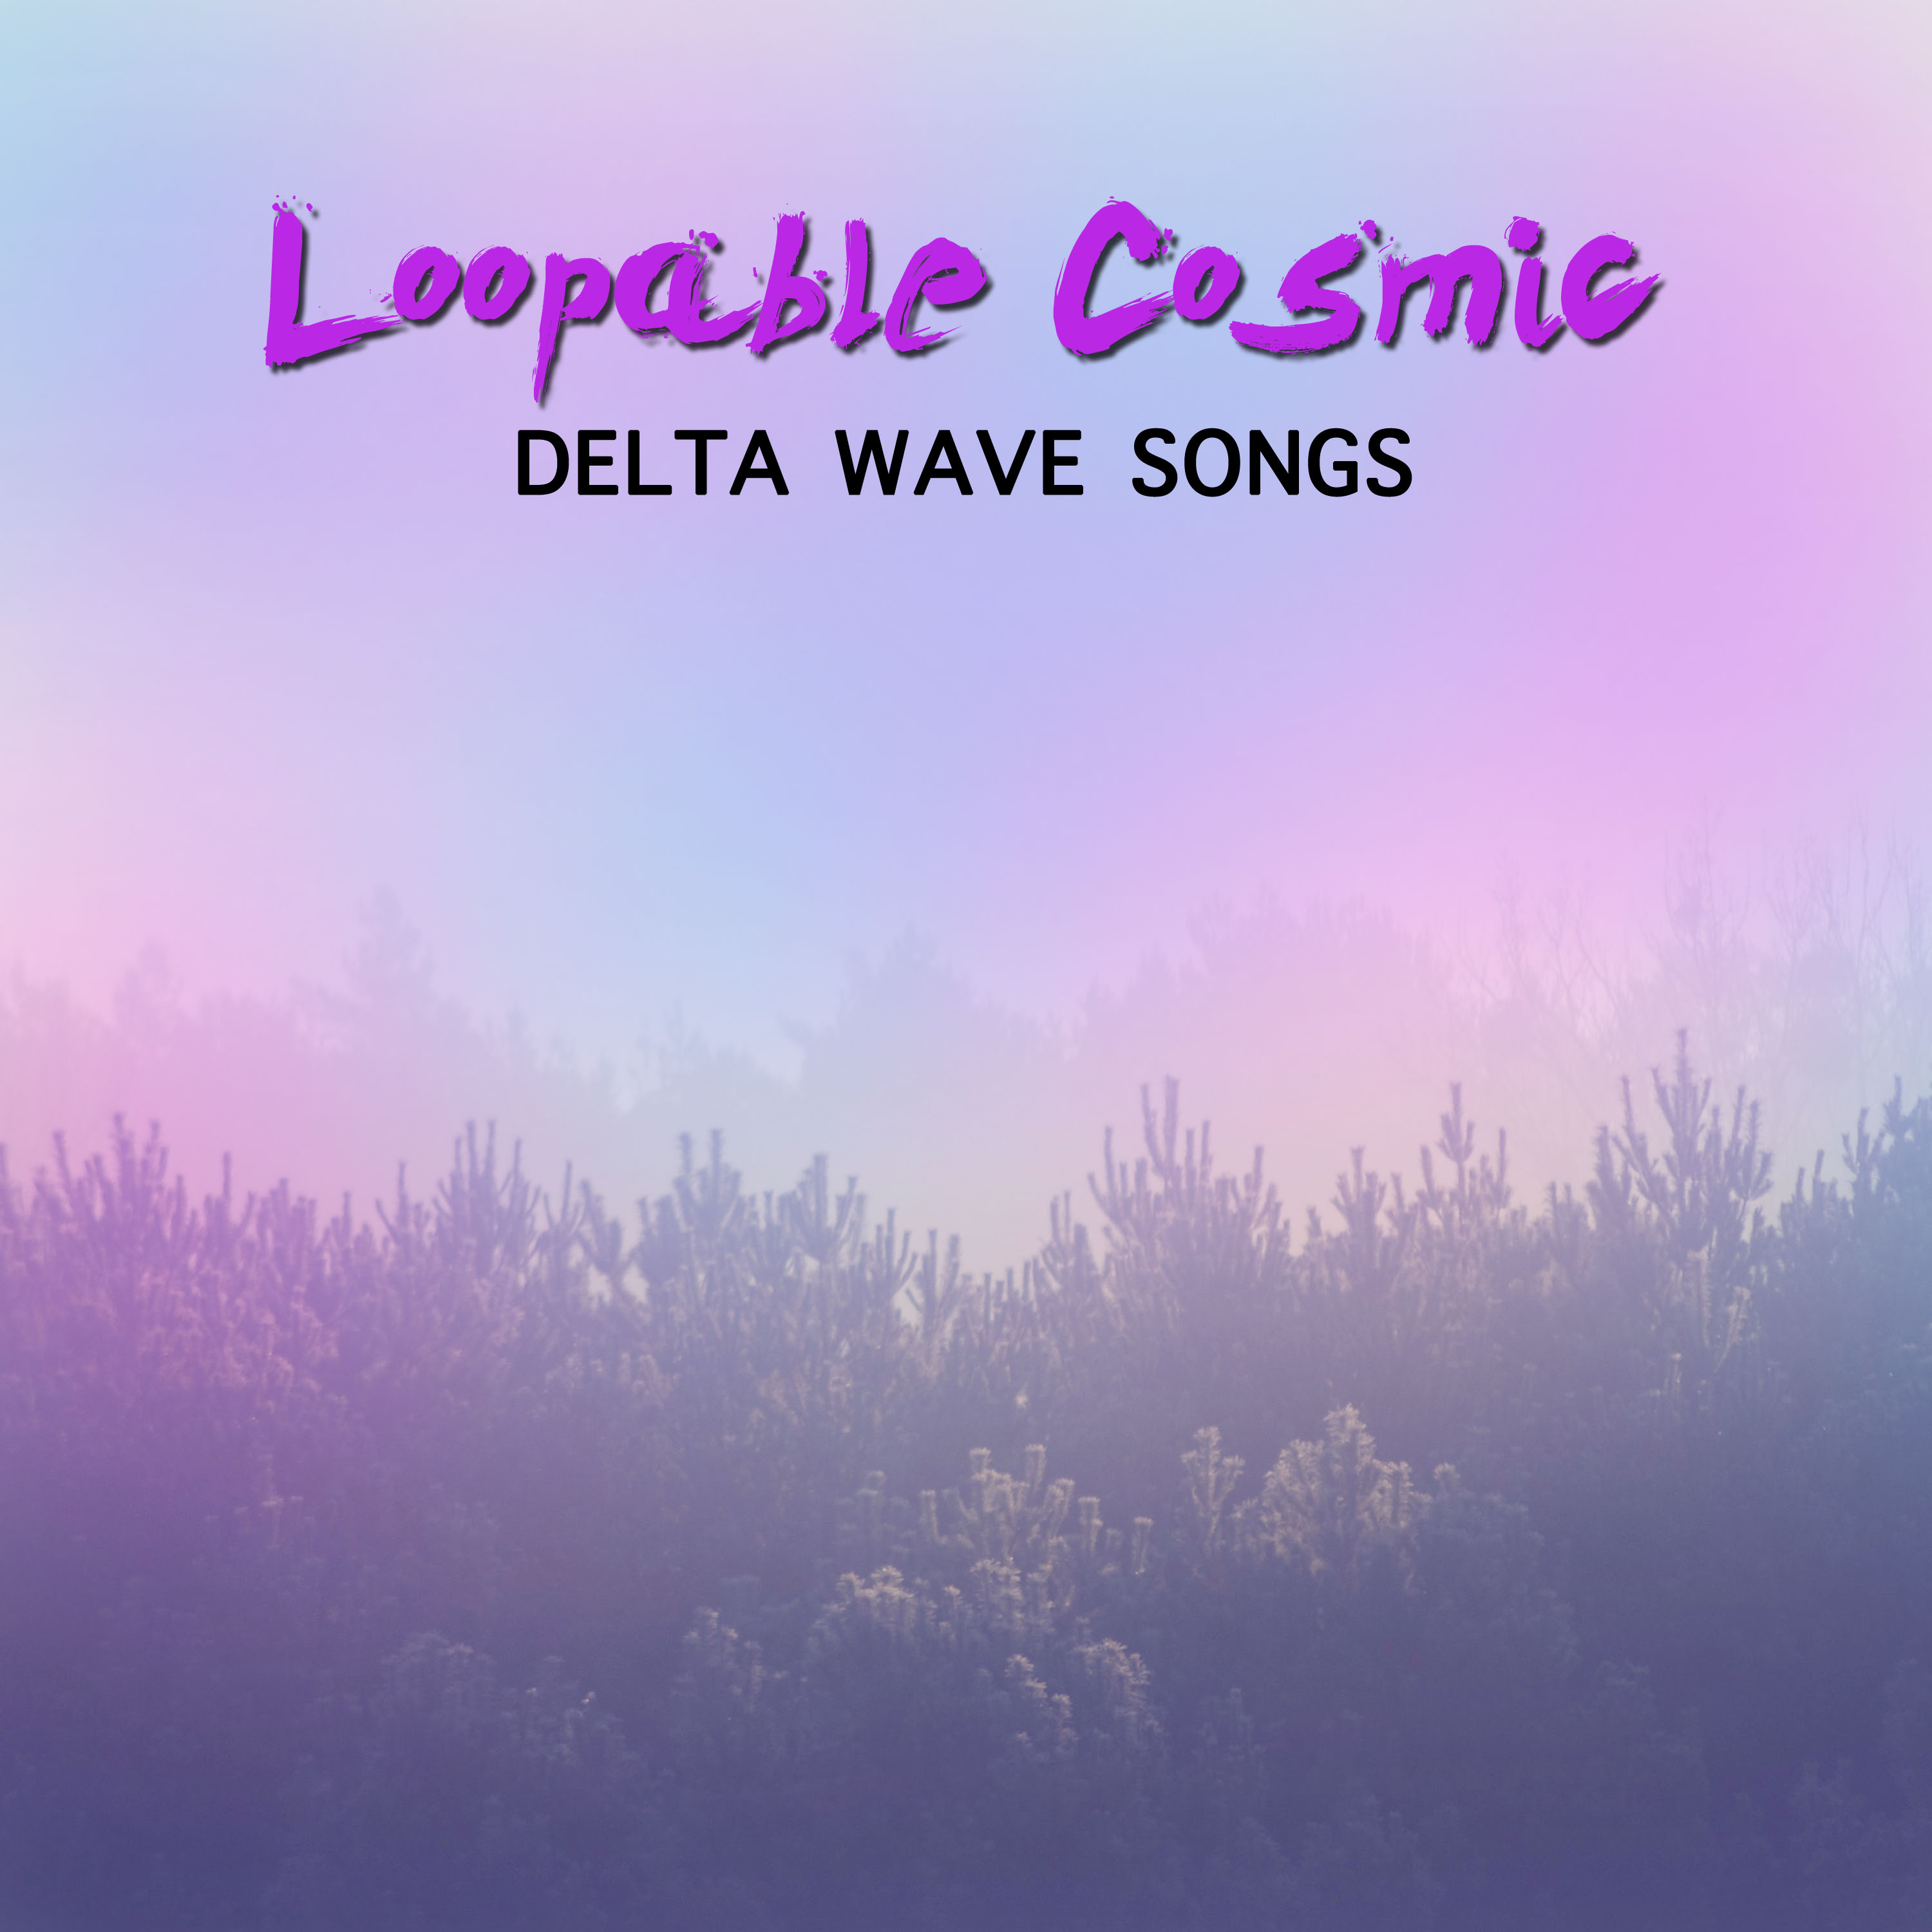 #14 Loopable Cosmic Delta Wave Songs